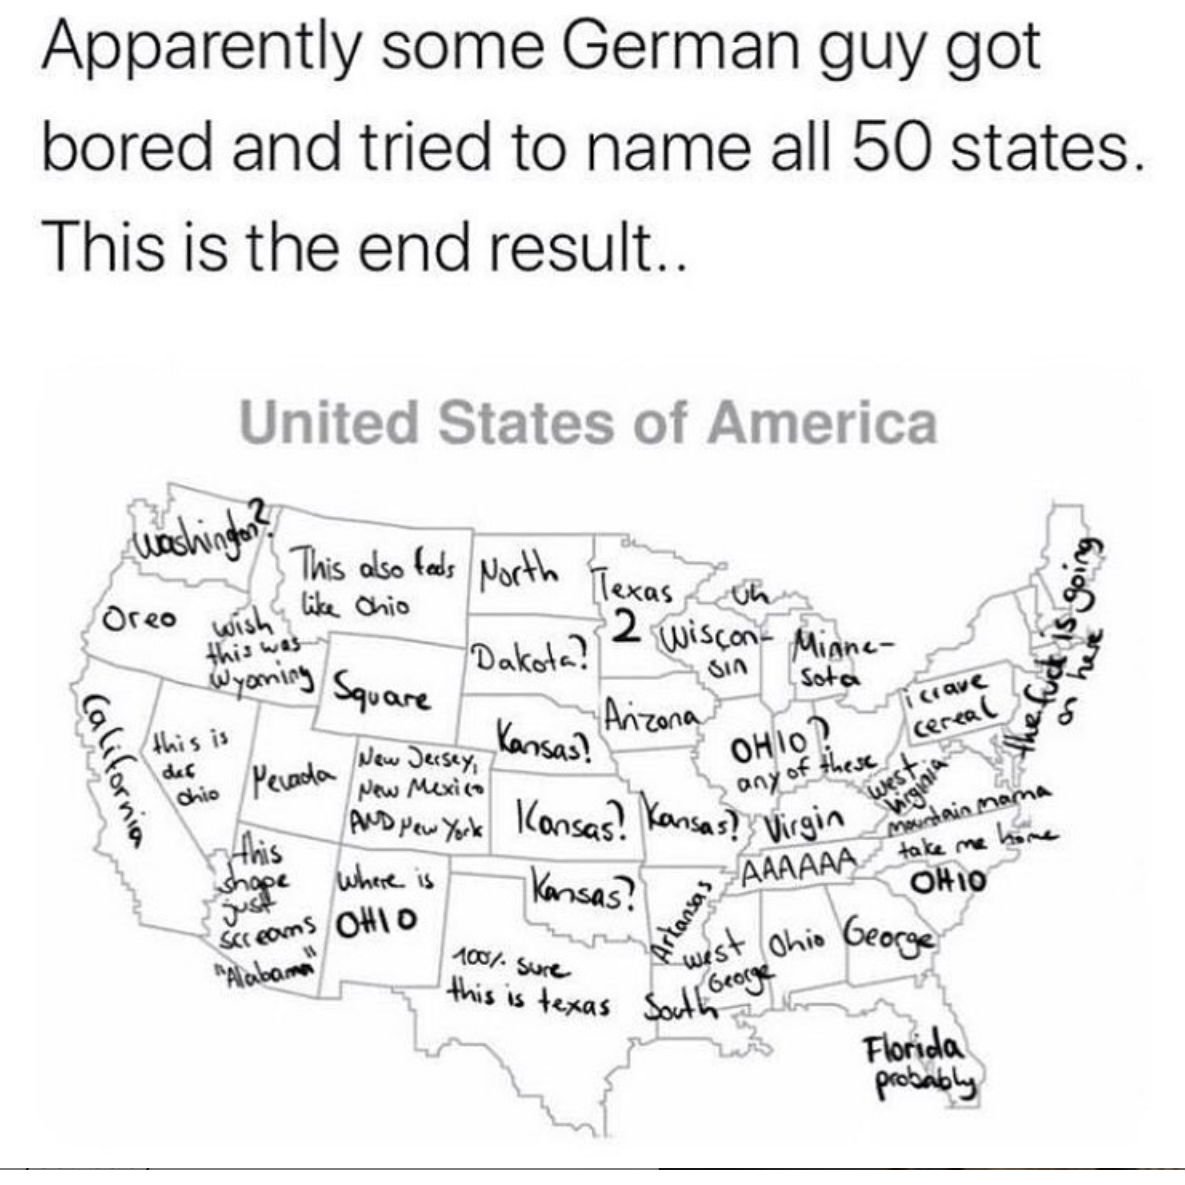 german guy tried to name all 50 states meme 